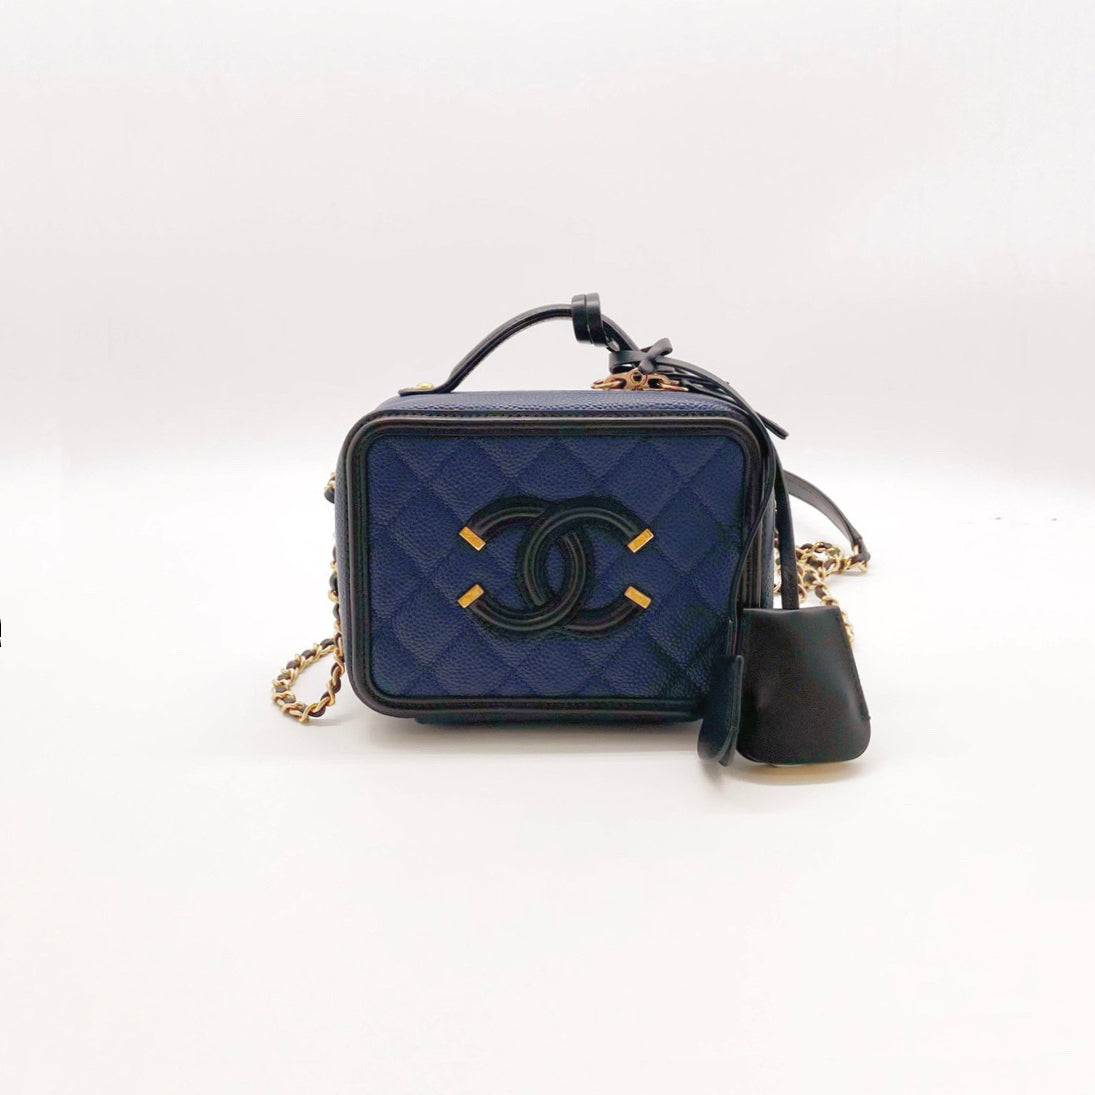 Chanel Navy Blue/Black Quilted Leather Small CC Filigree Vanity Case Bag  Chanel